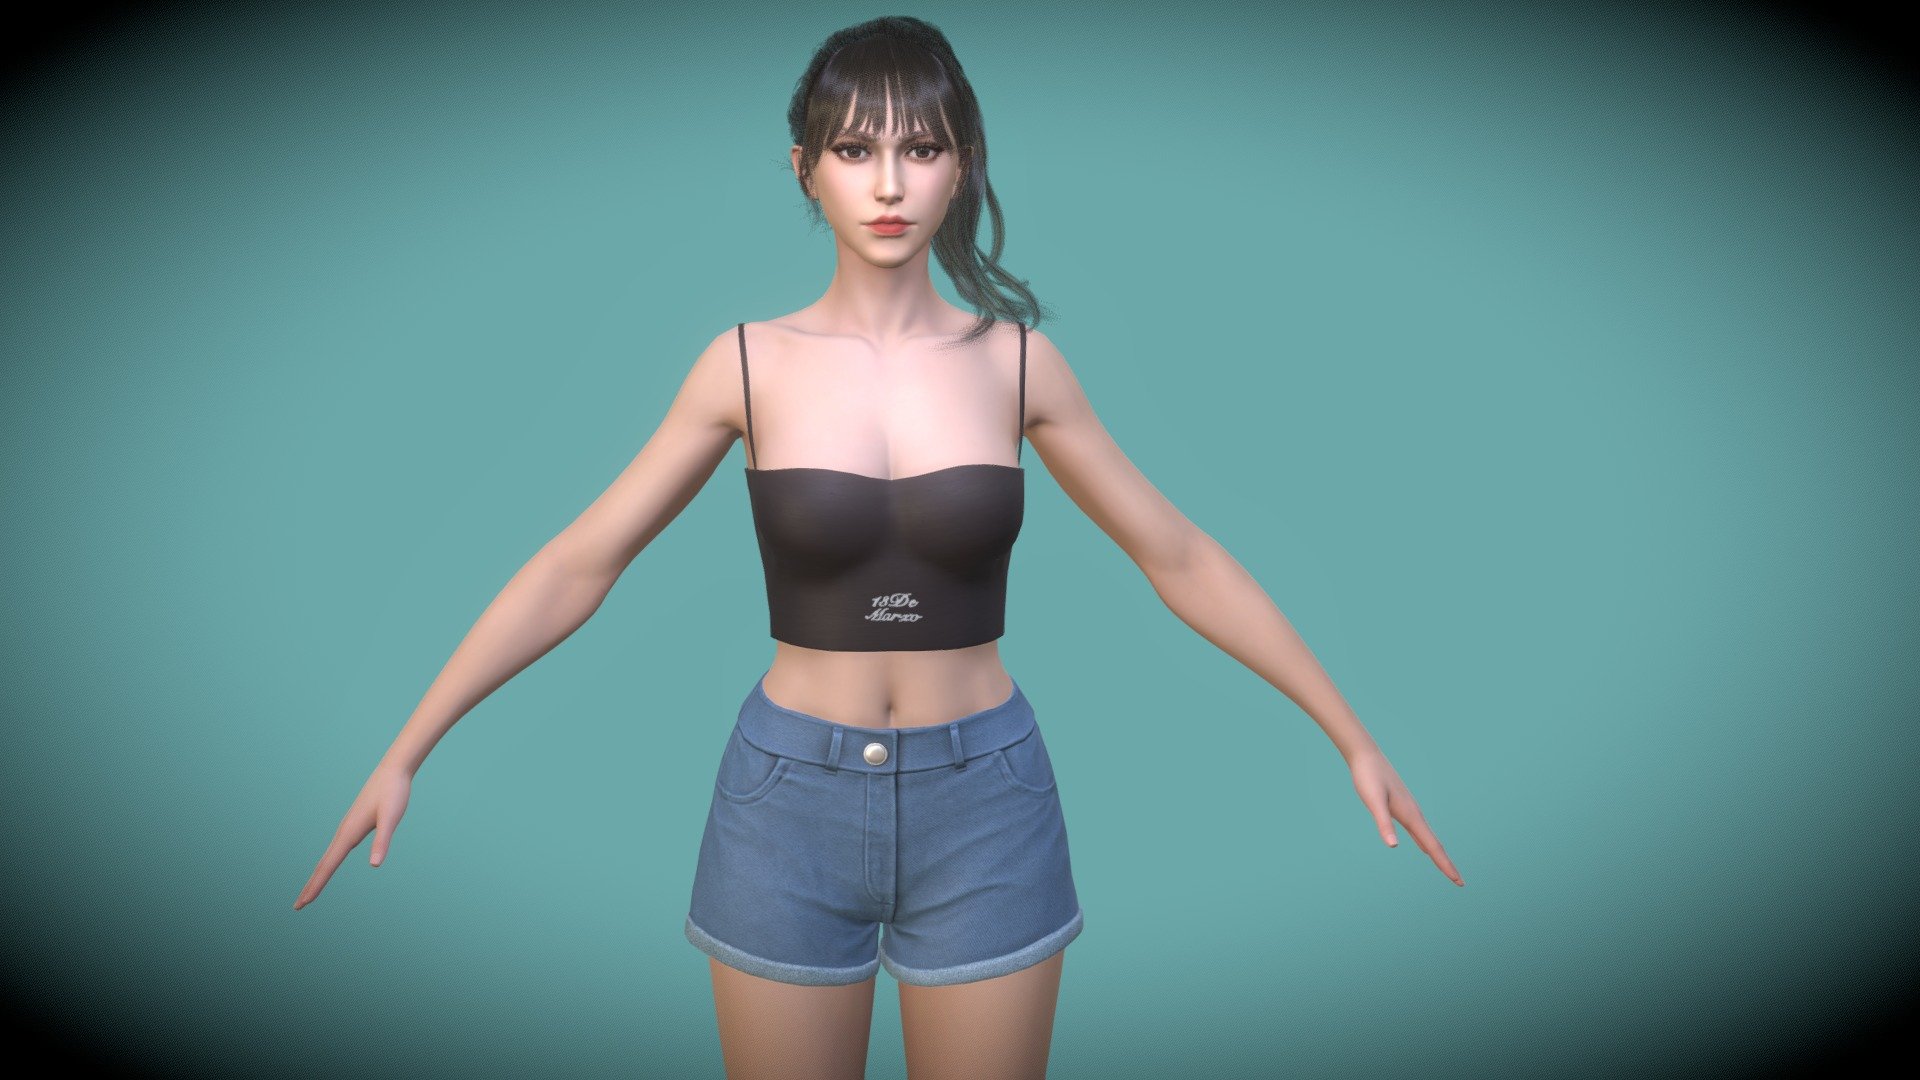 -Product name: Young Fashion woman wear tops and short jeans GameAssets

+Low poly, game ready, unrigged, PBR textures. Include nude body mesh.

Basemesh Highpoly mesh zbrush ztl file included.Only basemsh,cloth not included.

+2body versions: Full Clothes,Full Nude.

161144 tris.

Maya version：2016

mb FBX OBJ DAE ztl format fles included.

PBR Texture size ：Basemesh 4096*4096 tga format.OpenGL Normal map.Cloth:2048 tga format.OpenGL Normal map

The product please visit(NUDE PHOTO):https://www.artstation.com/a/23745461       Preview images is captured Marmoset toolbag 4.

Enjoy~ - Fashion Woman Tops And Short Jeans Game Assets - Buy Royalty Free 3D model by Vincent Page (@vincentpage) 3d model